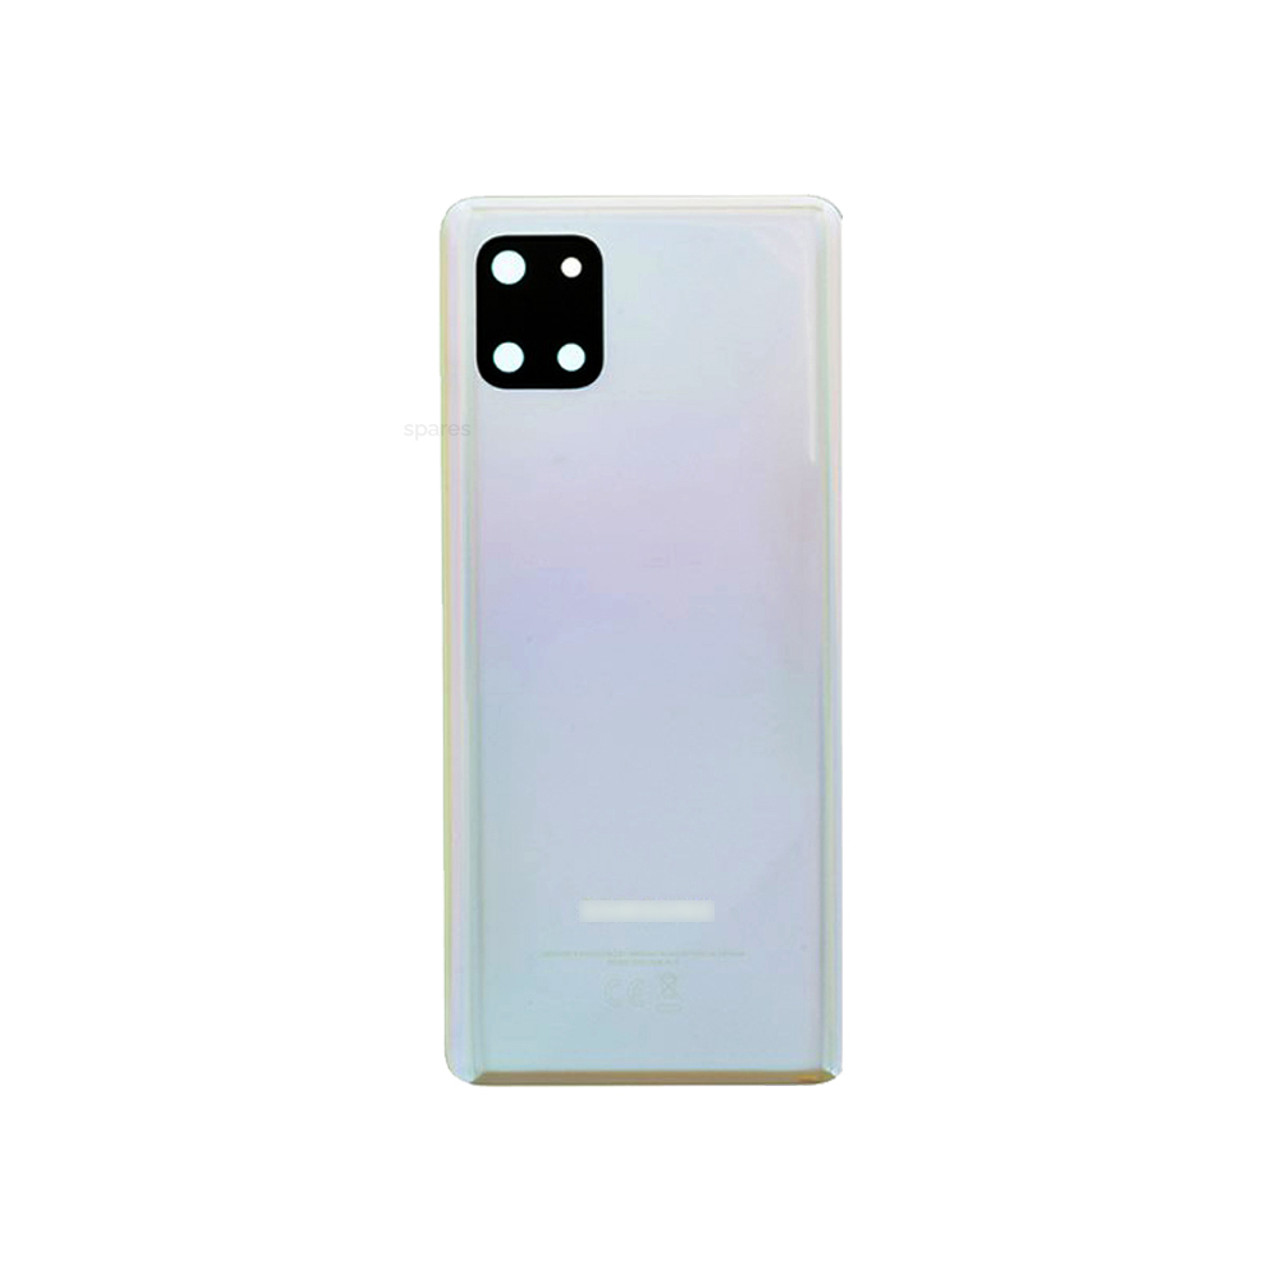 Replace Back Glass Lens & Adshive Galaxy Note 10 Lite SM-N770F Aura White